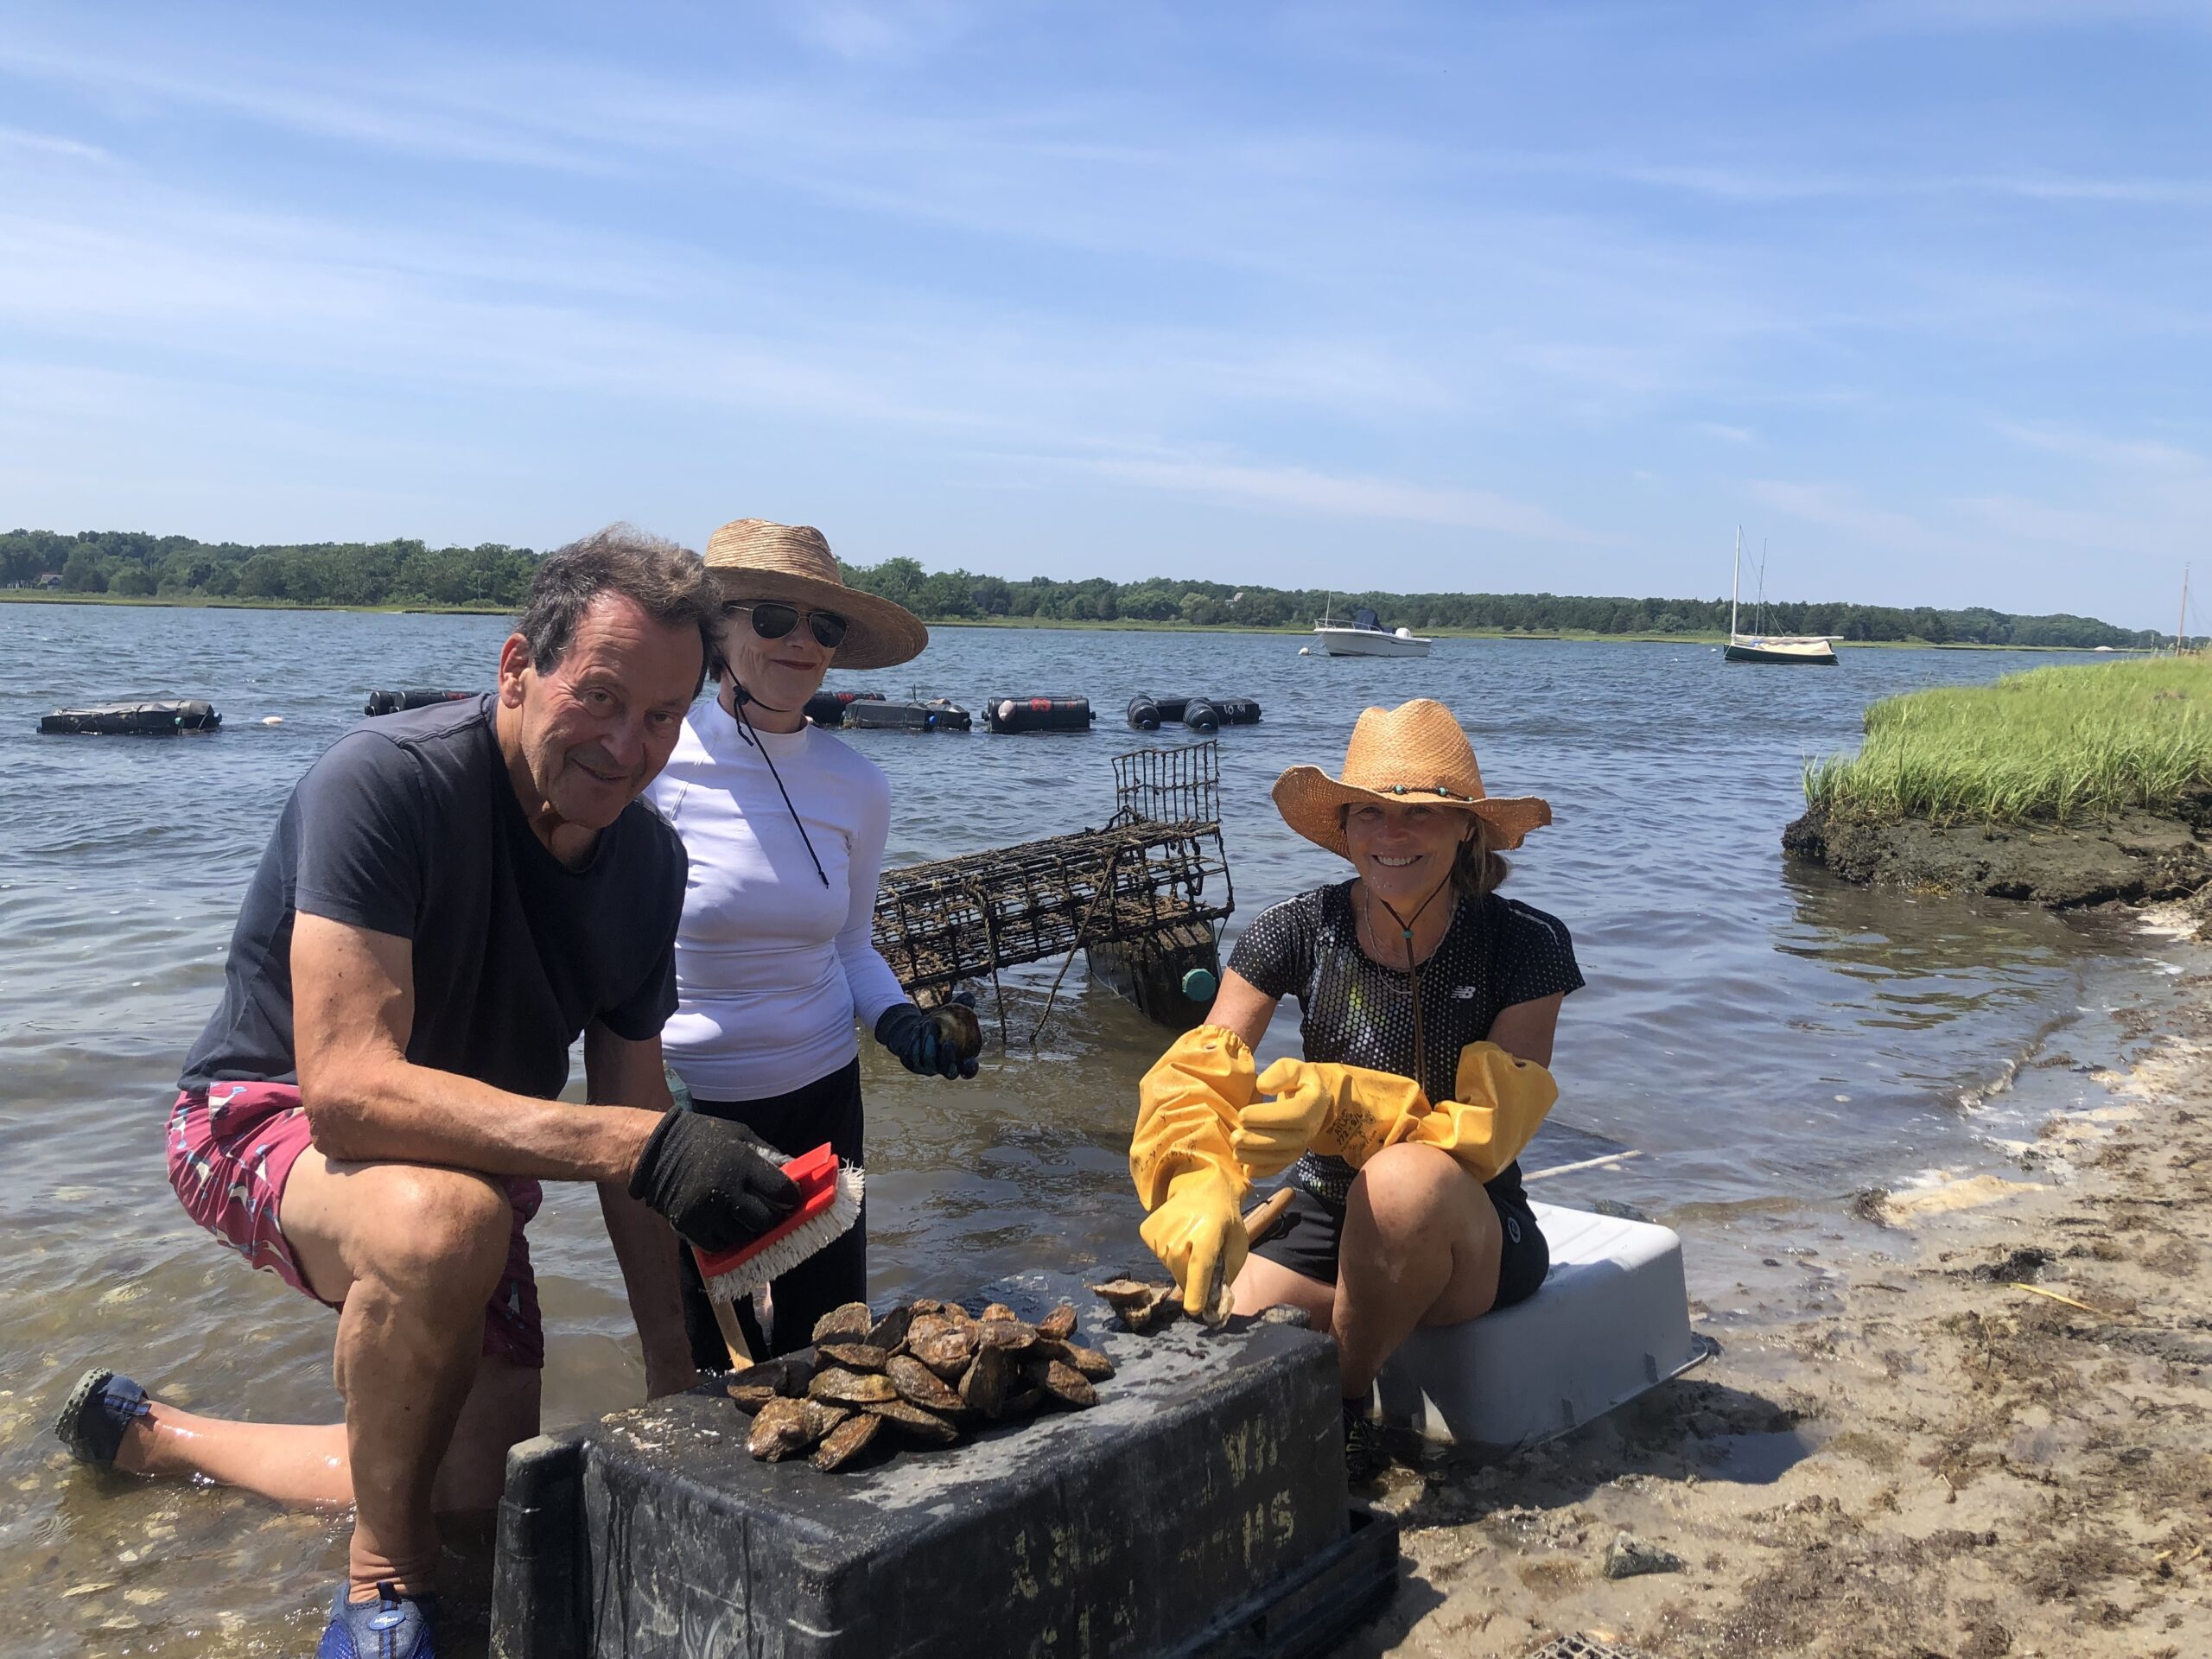 Oyster gardeners Geoffrey Drummond, Ginny Edwards and Kathy Green meet up about every three weeks to scrub cages, tend to their oysters and socialize. JENNY NOBLE